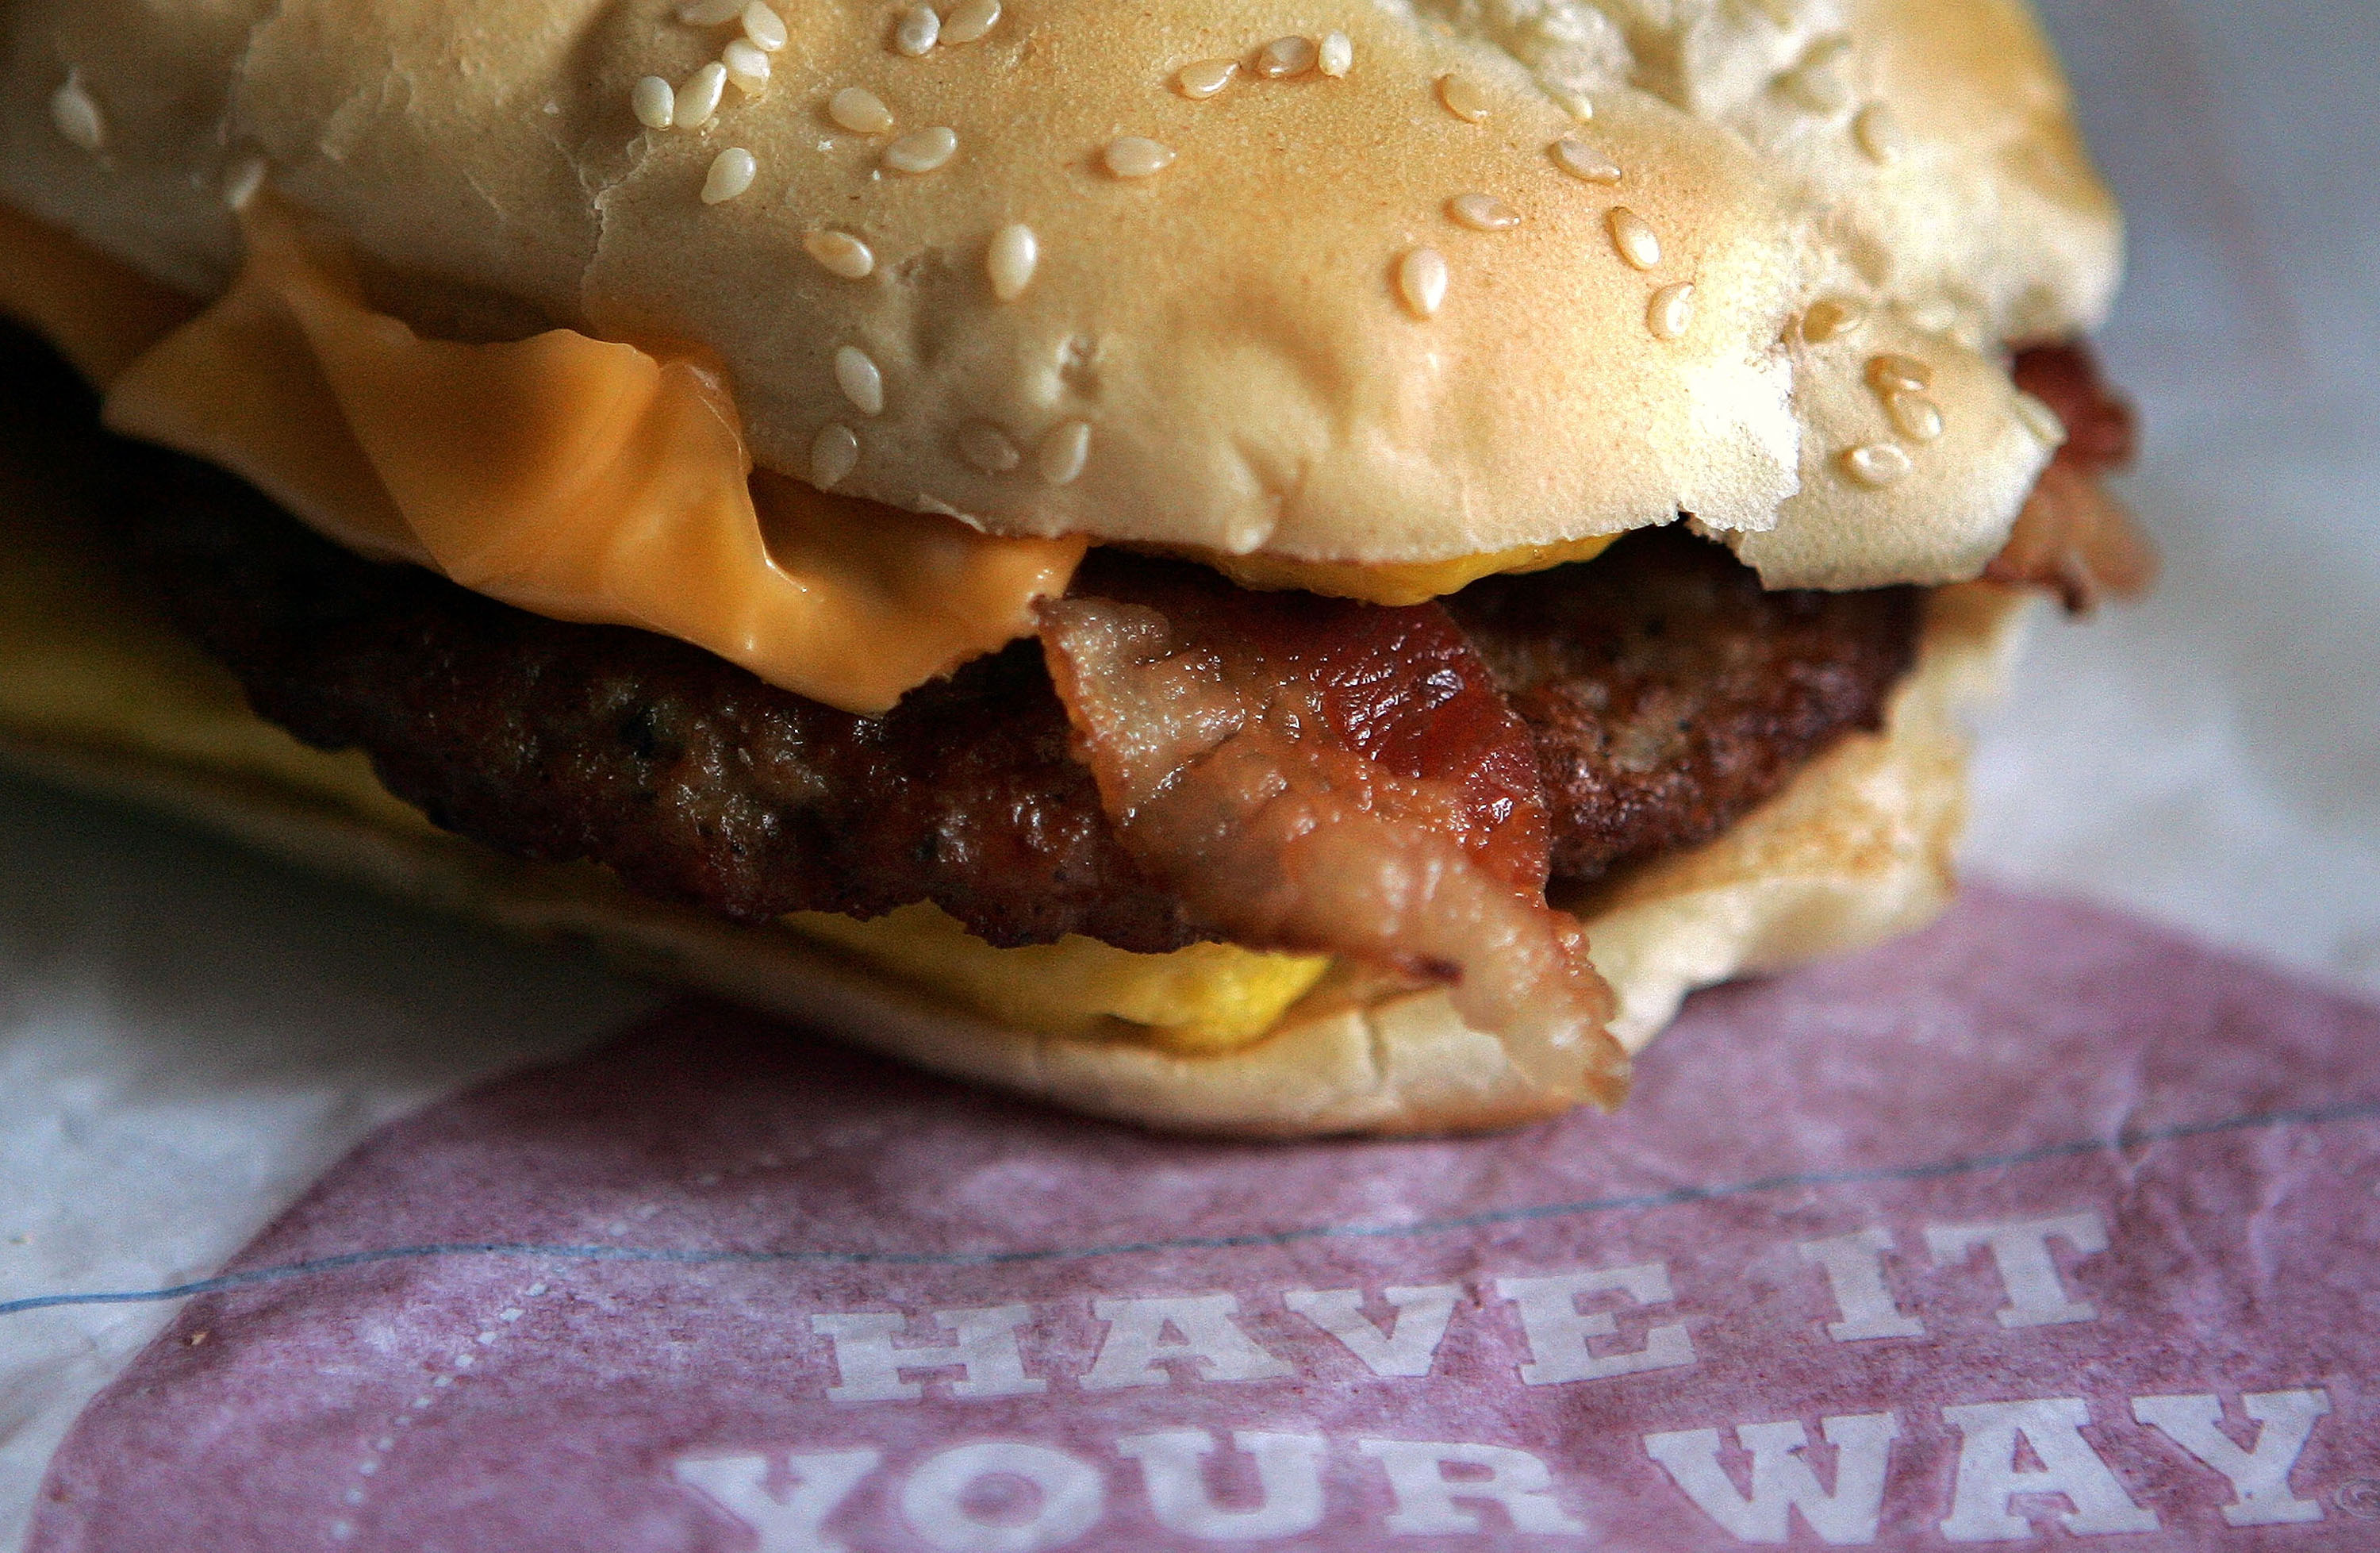 Careful: Fast Food Could Have Industrial Plasticizers